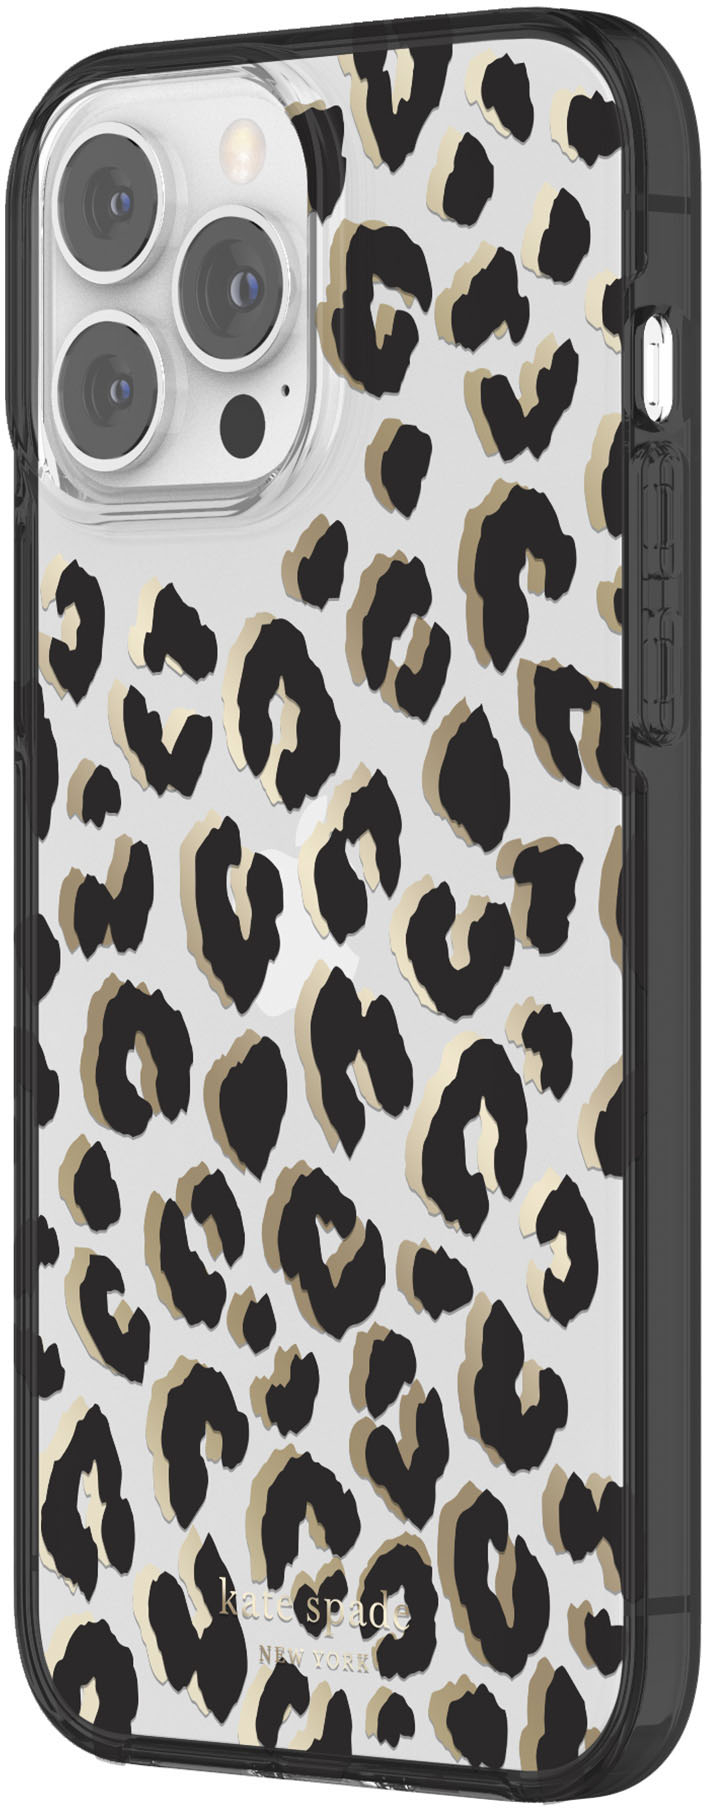 Kate Spade New York Apple Iphone 13 Pro Max/iphone 12 Pro Max Protective  Case - Multi Floral : Target